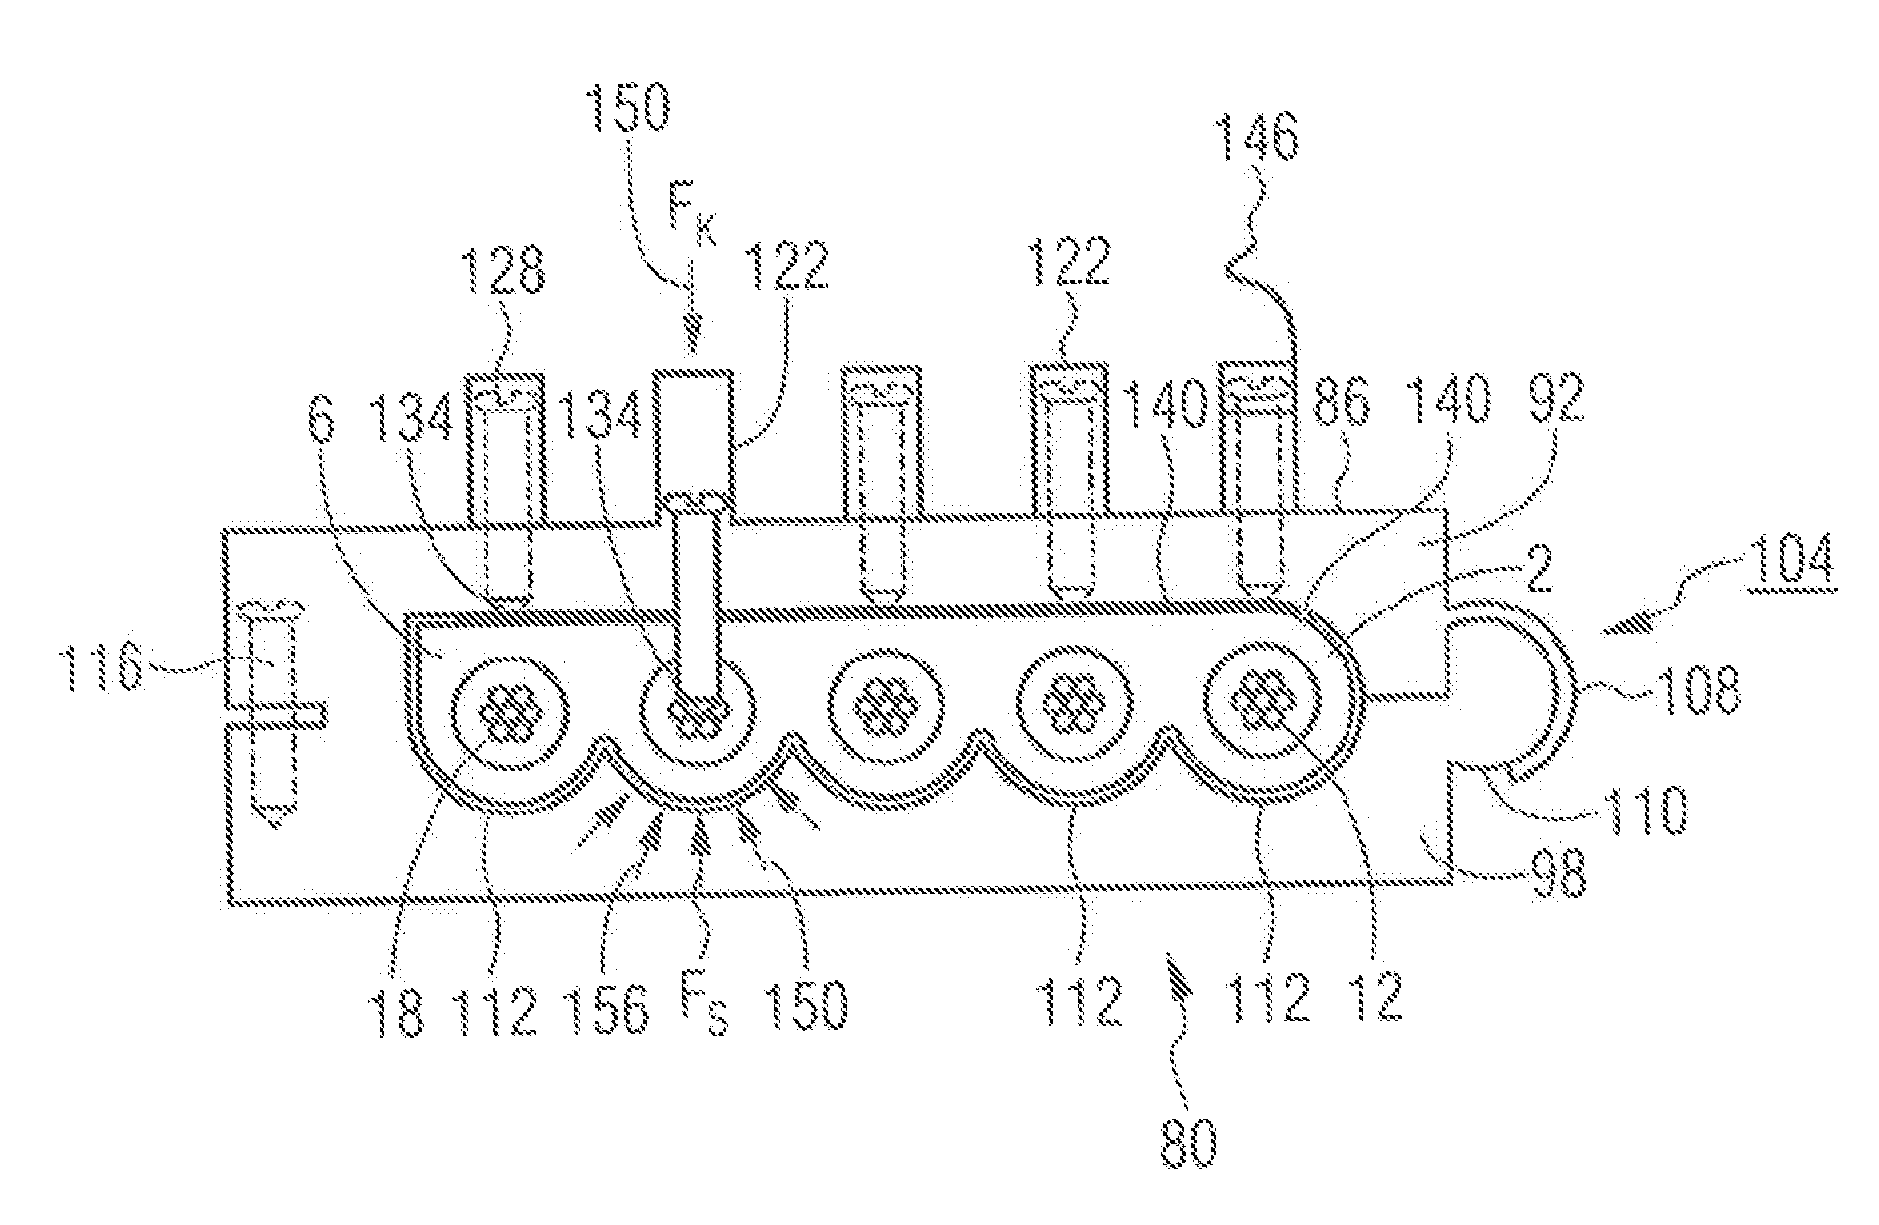 Electrical contact-making system